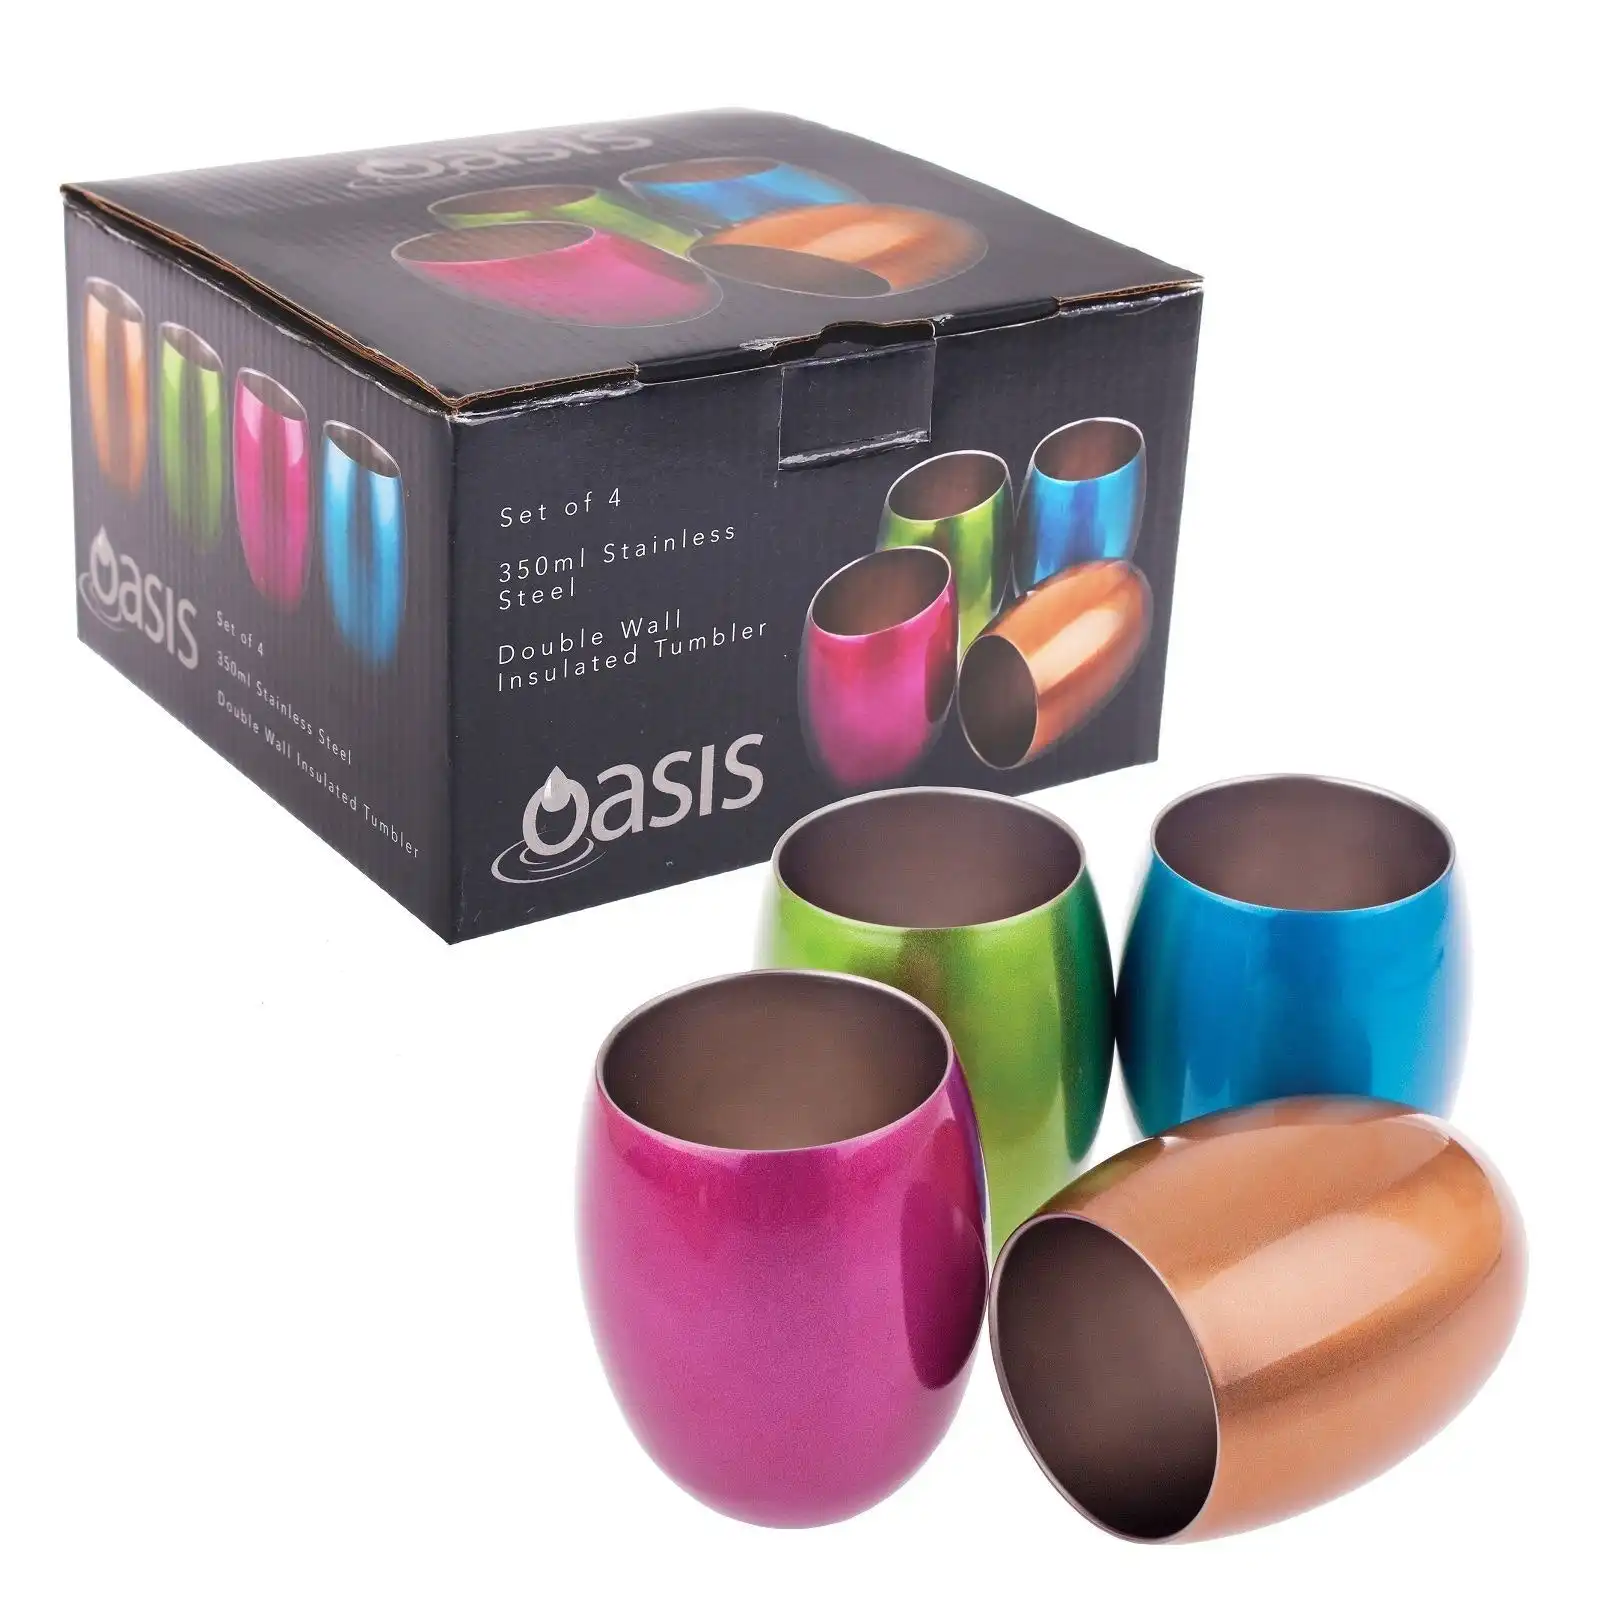 Oasis DOUBLE WALL INSULATED TUMBLERS 350ml - SET OF 4